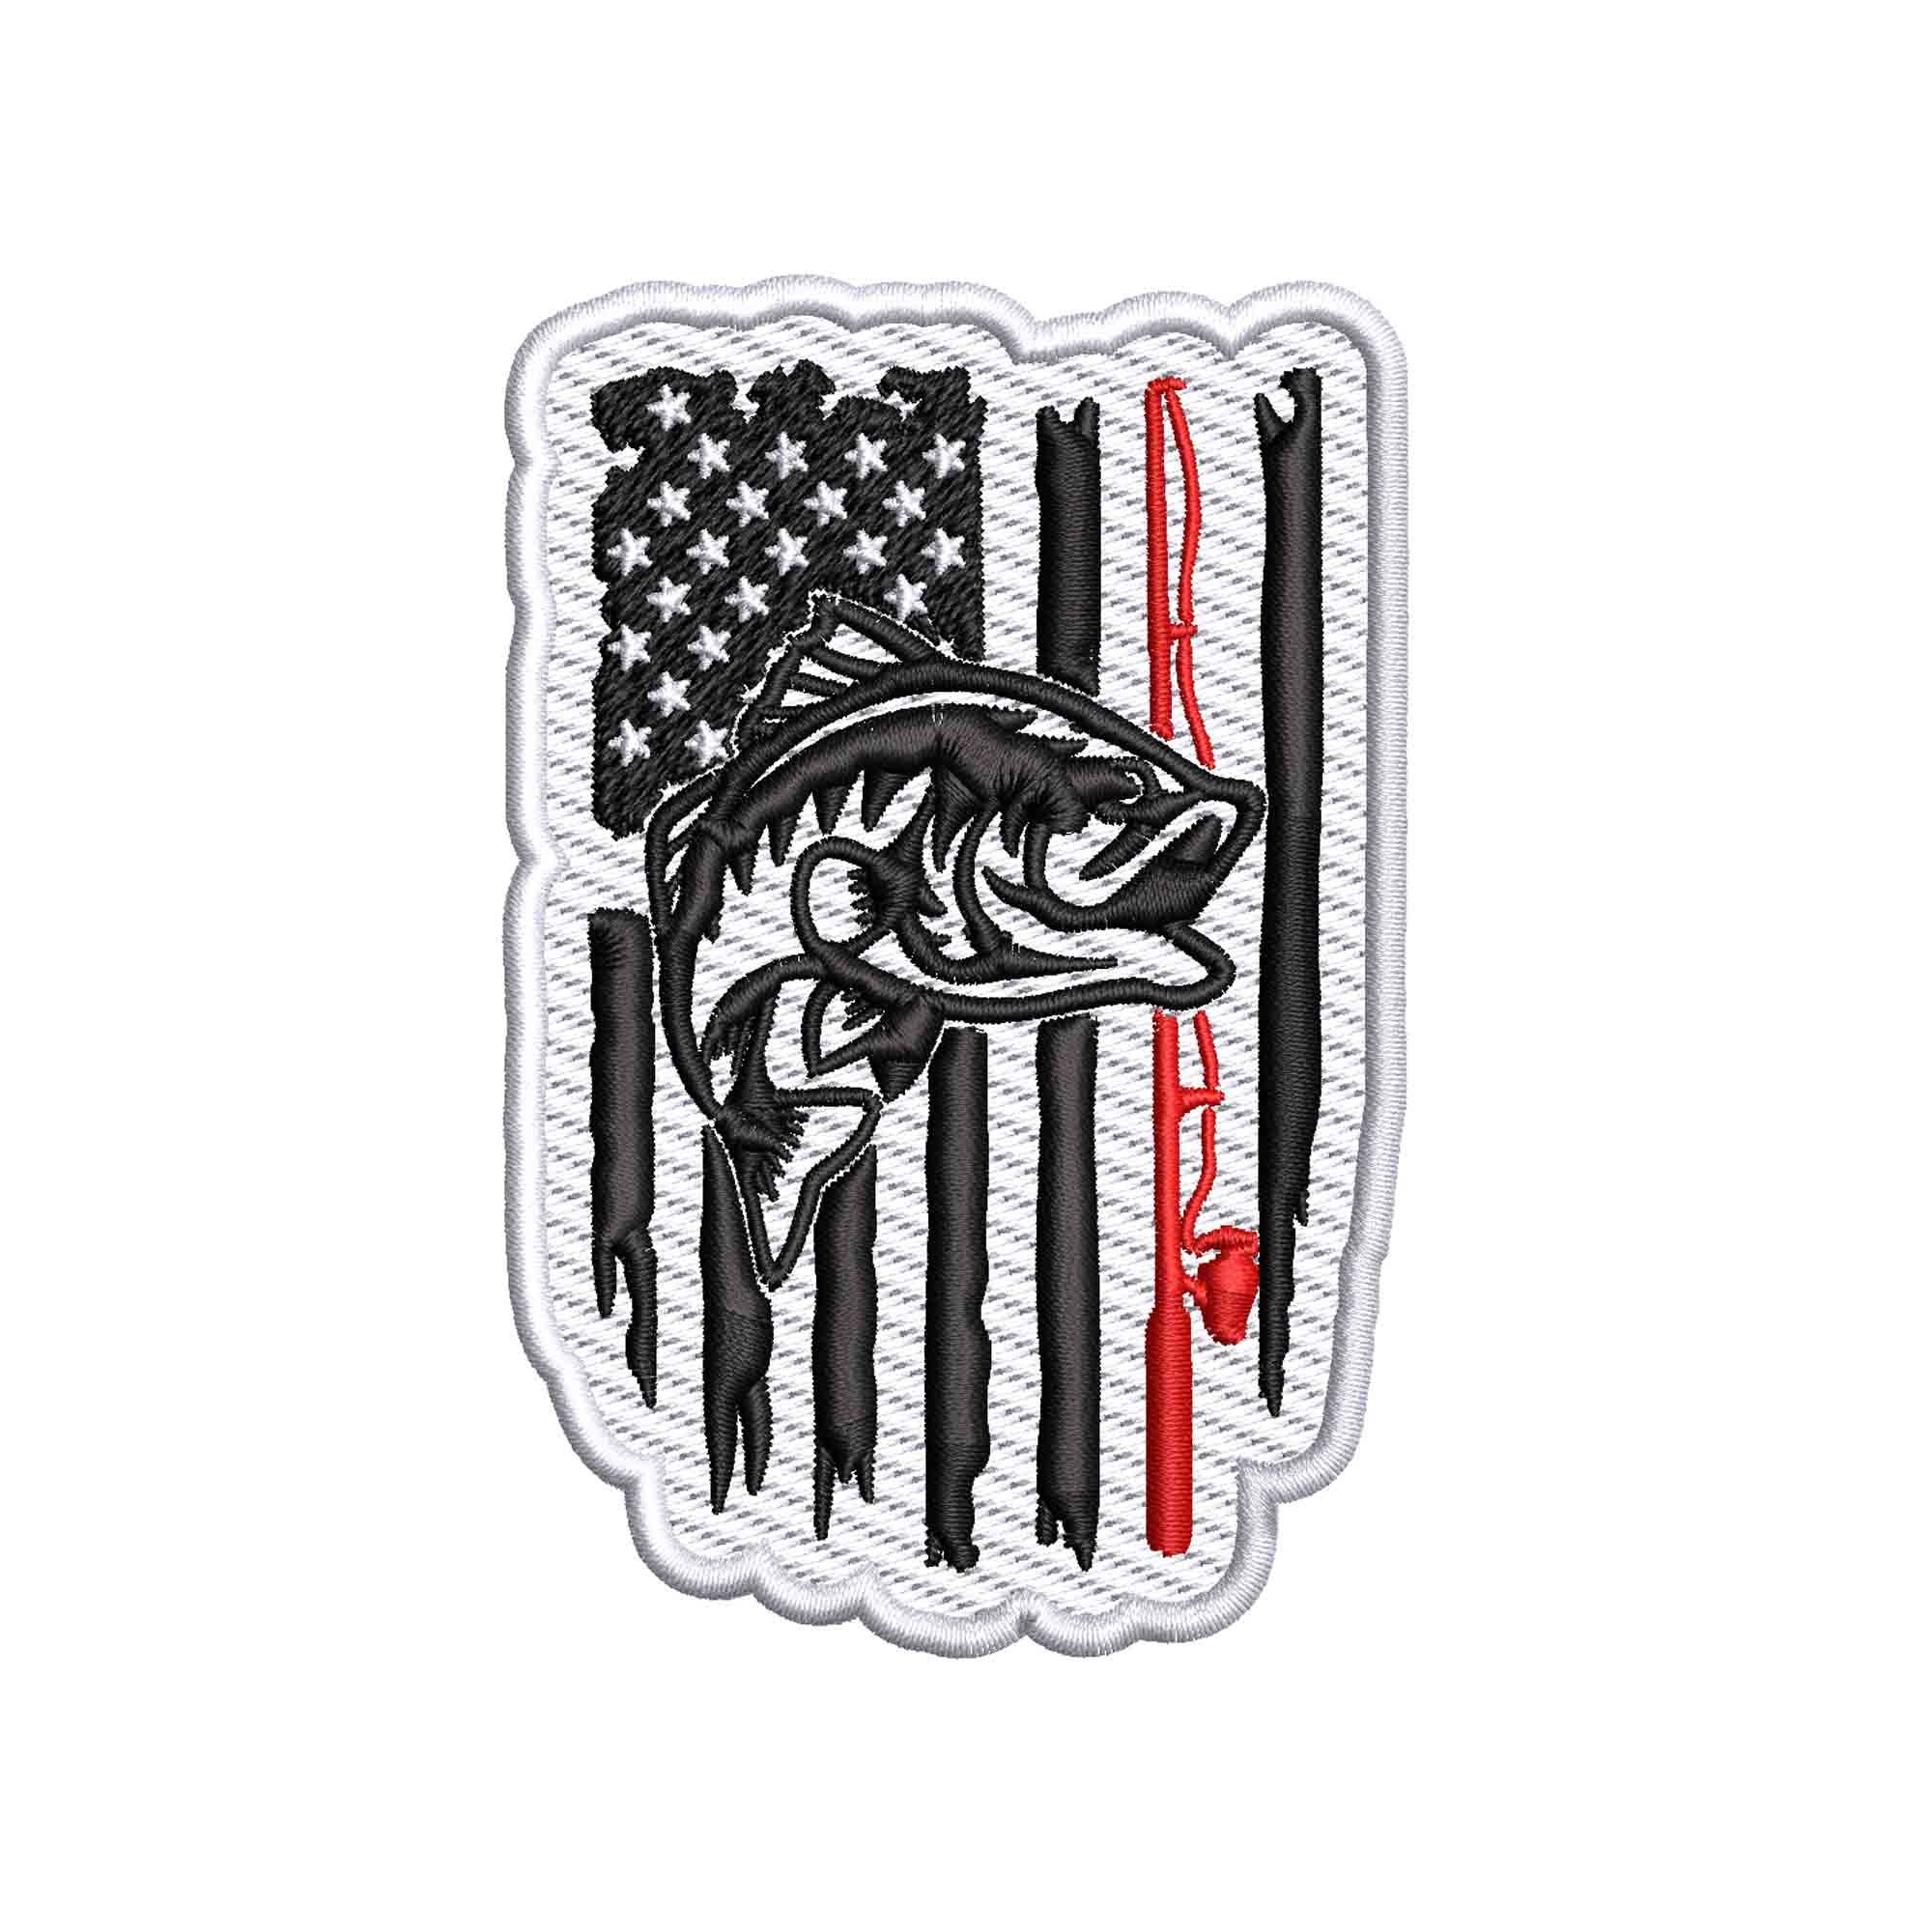 STRENLISHING LINES Jacket Patch Fishing Tackle, Fishing Line 